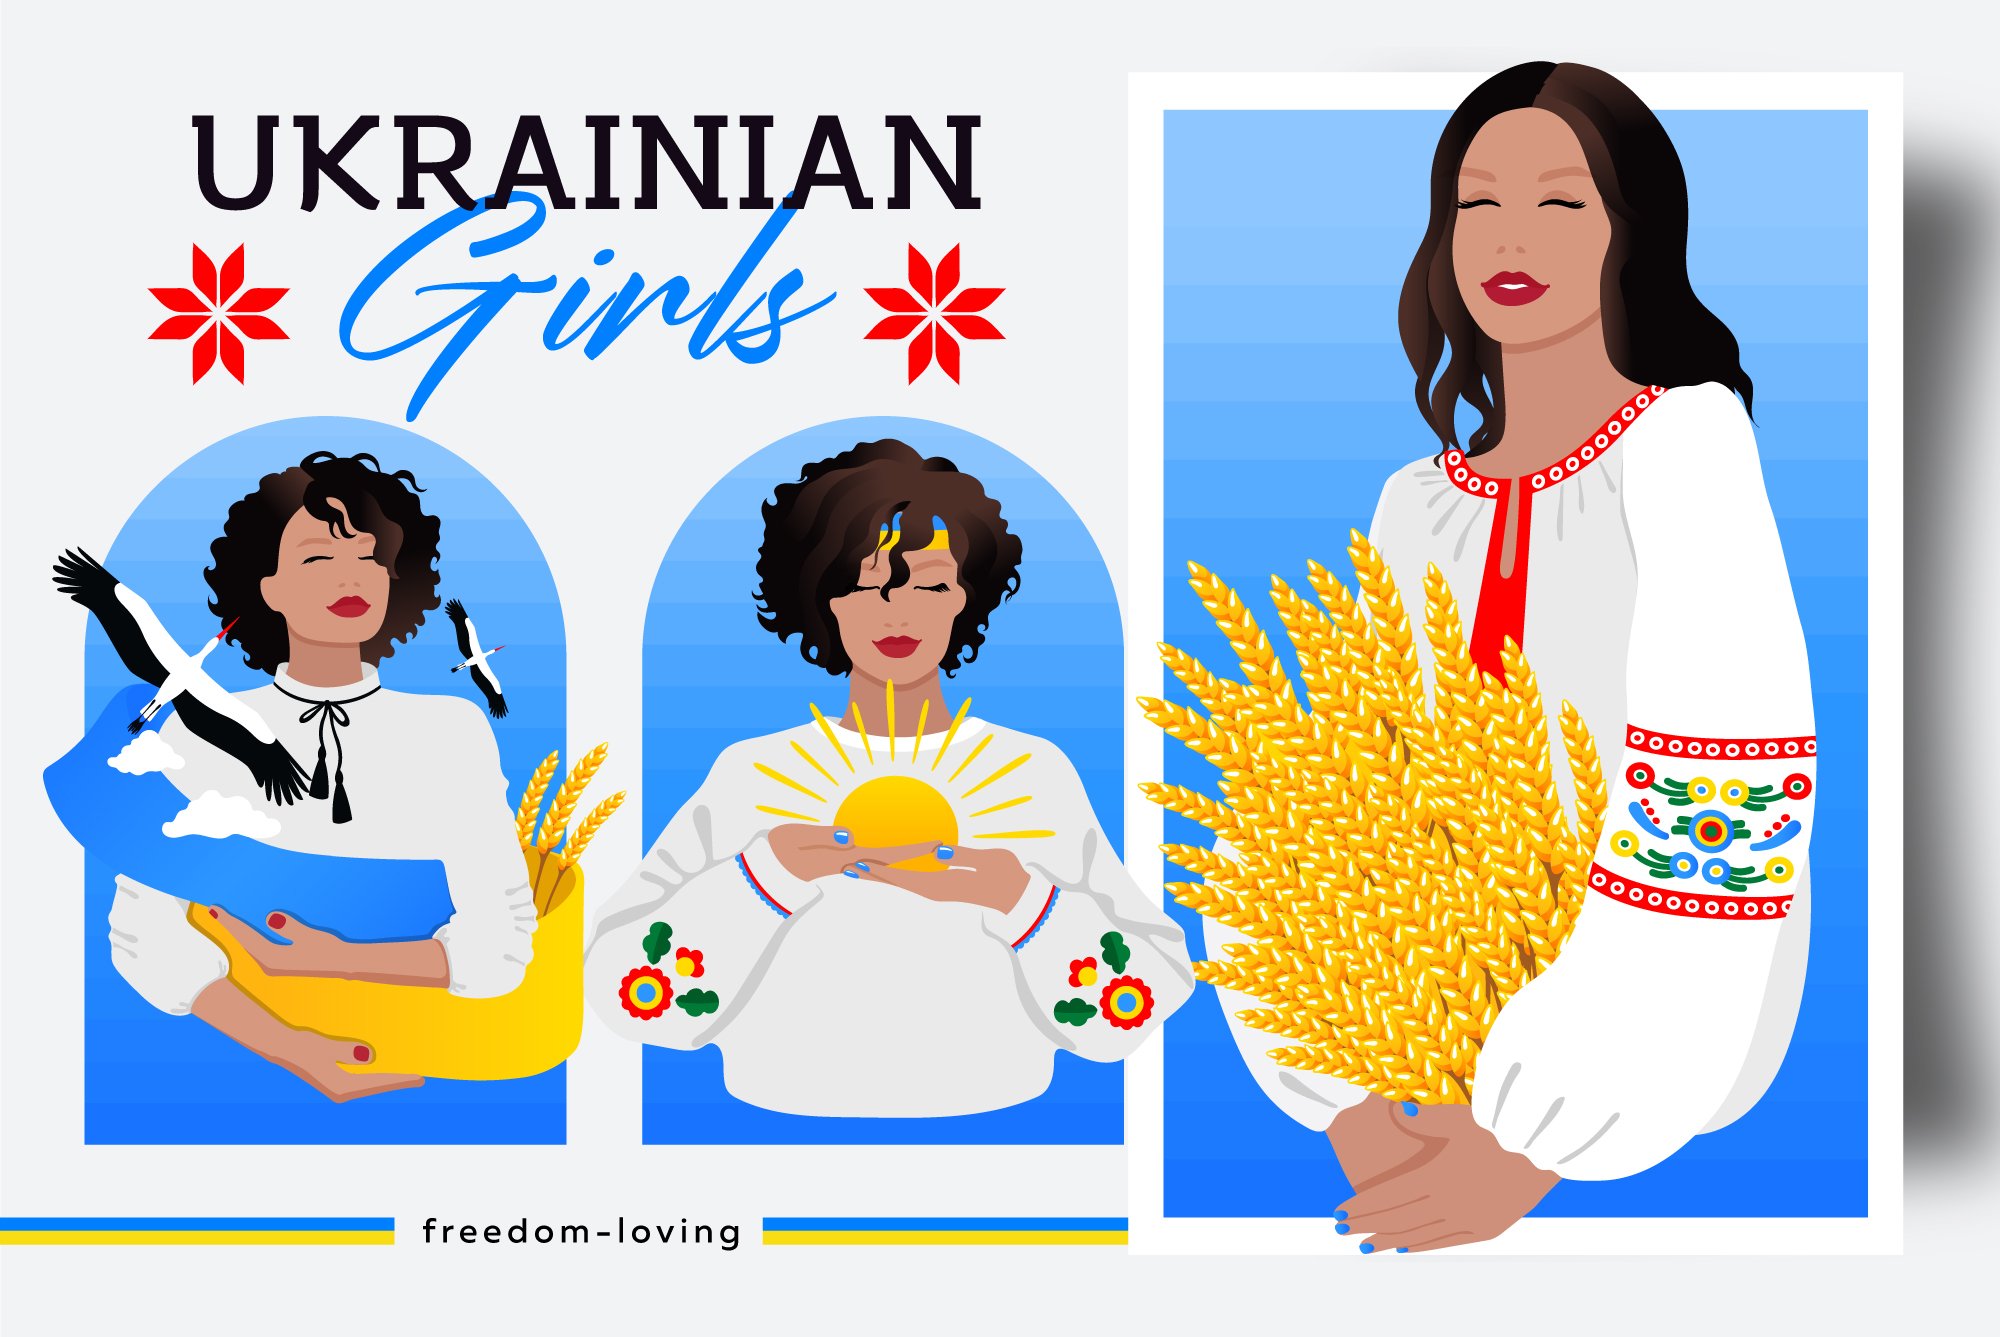 Ukrainian girls and woman clipart cover image.